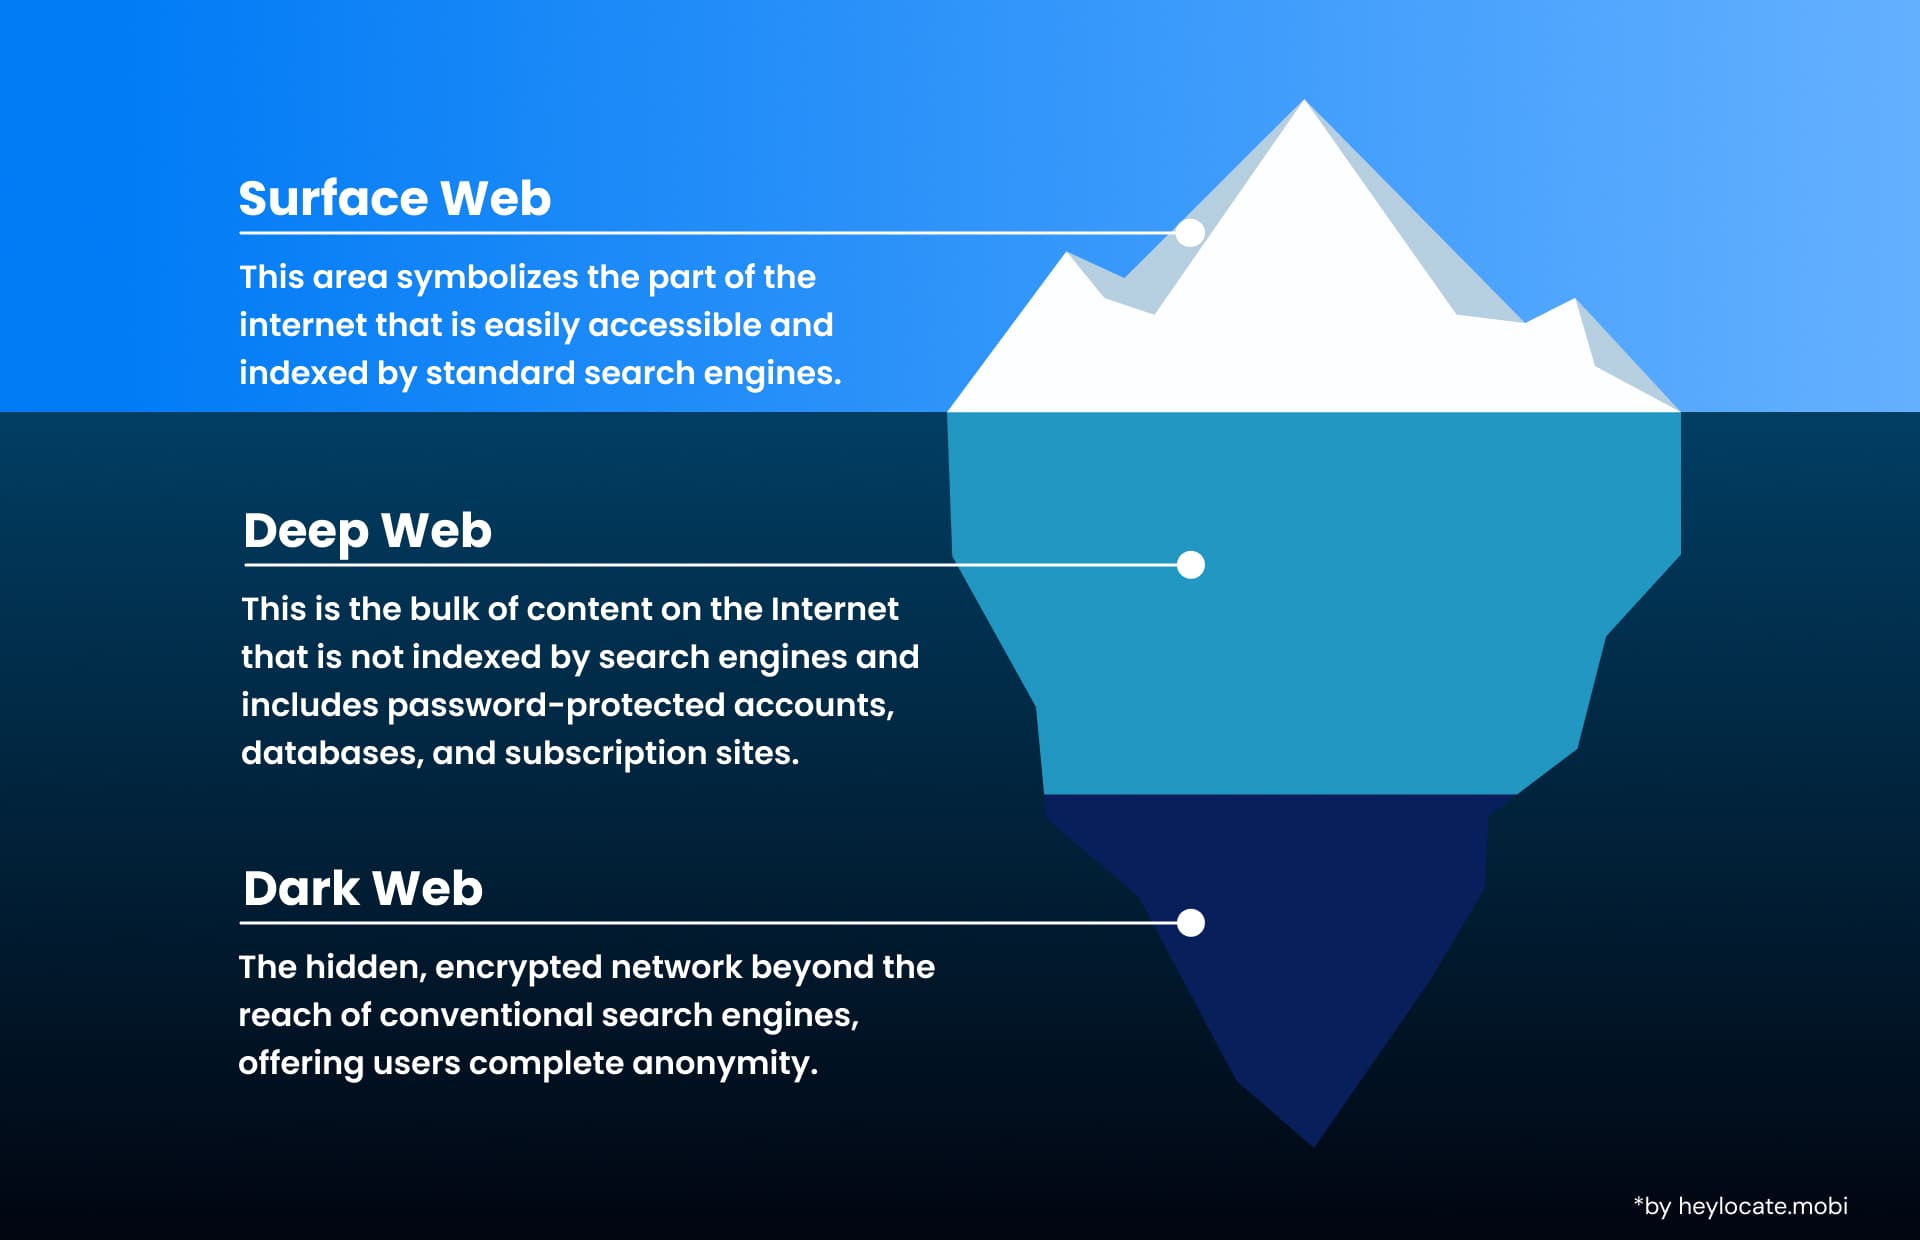 An image of an iceberg with three parts of the web: the public surface web, the deep web, and the anonymous dark web